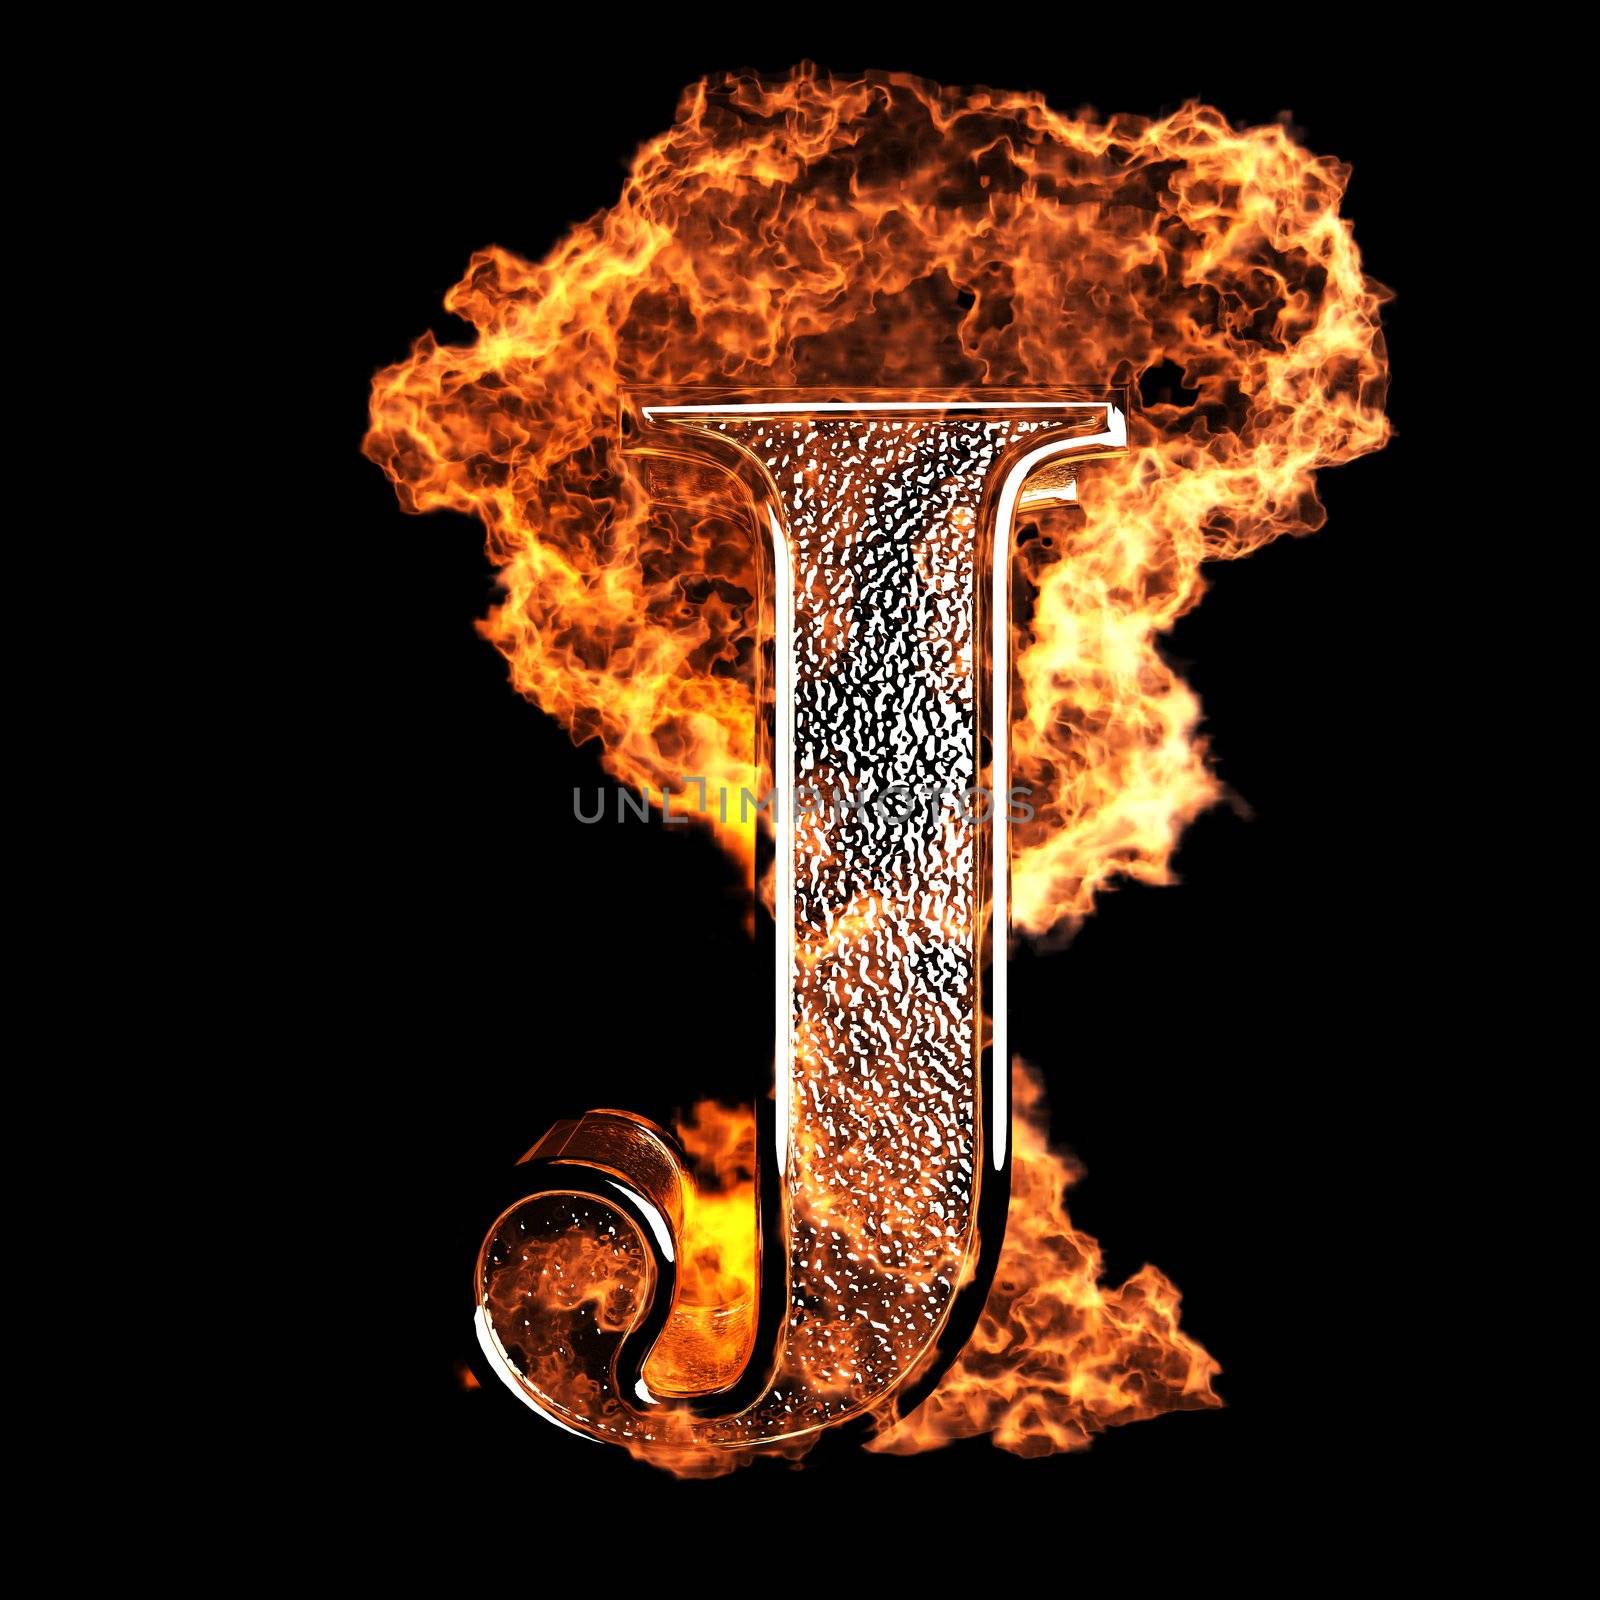 burning Letter made in 3D graphics